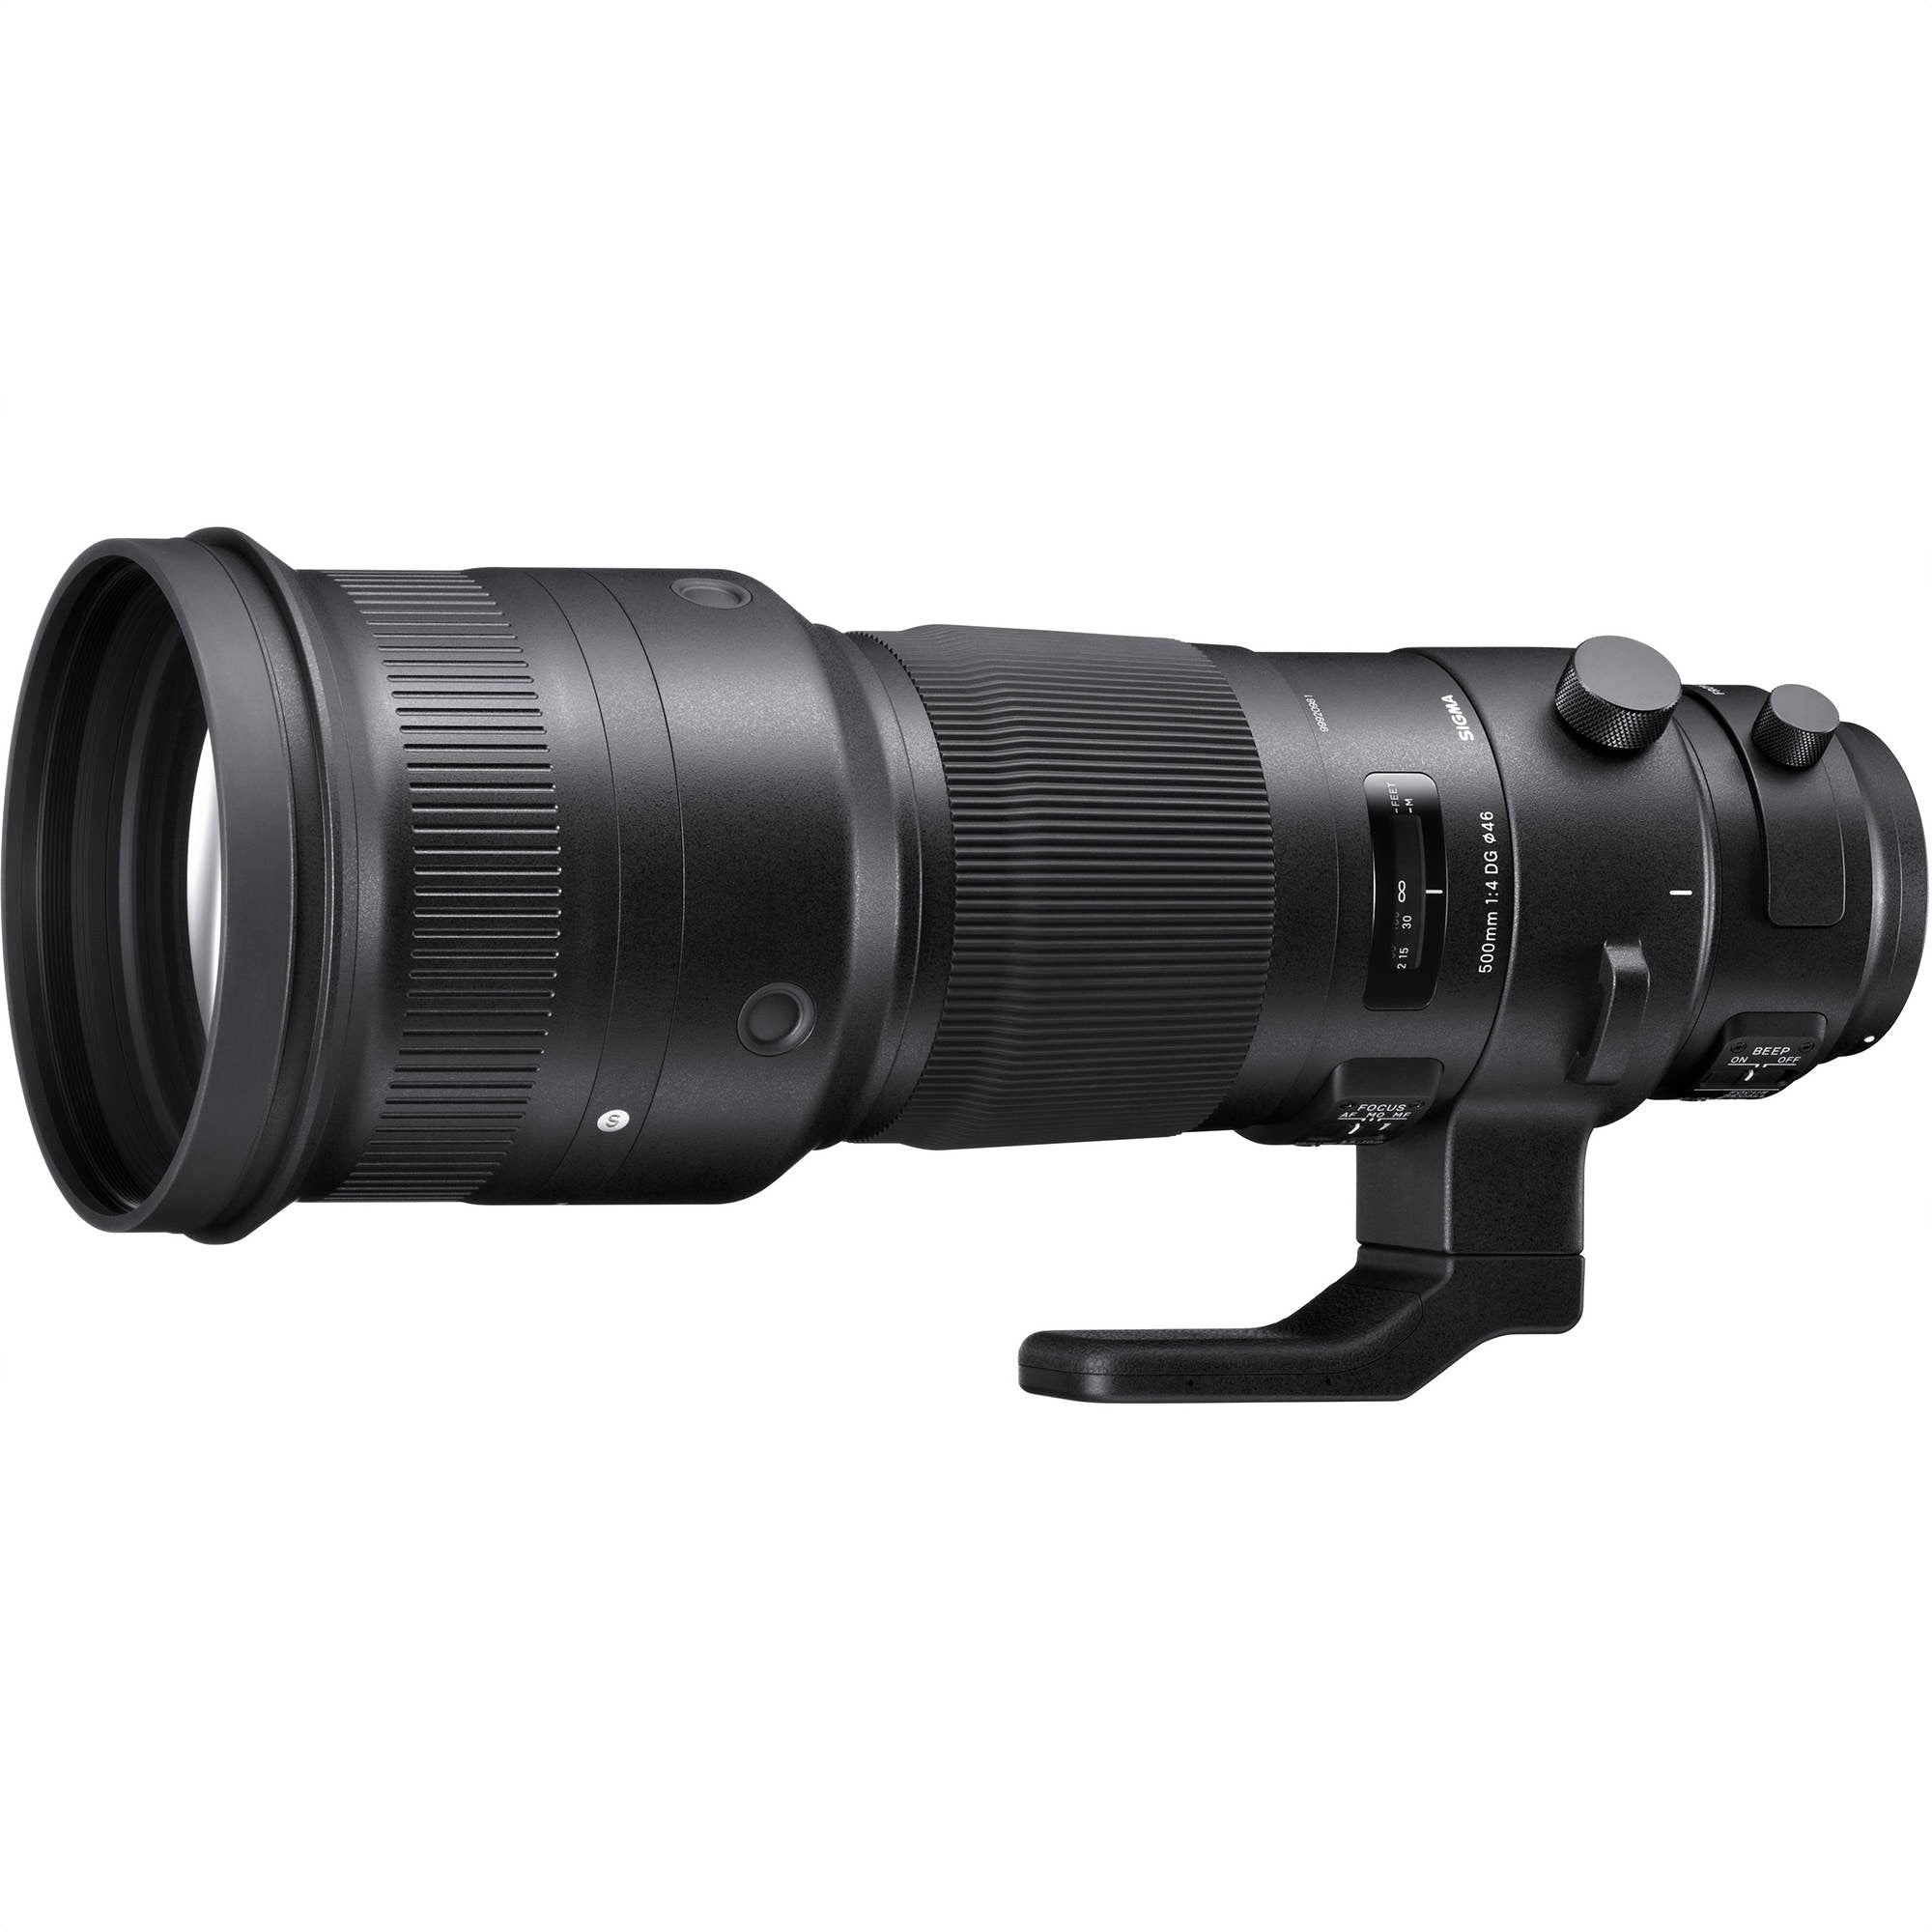 Sigma 500mm F4.0 DG OS HSM Sports Lens for Canon EF in a Side View